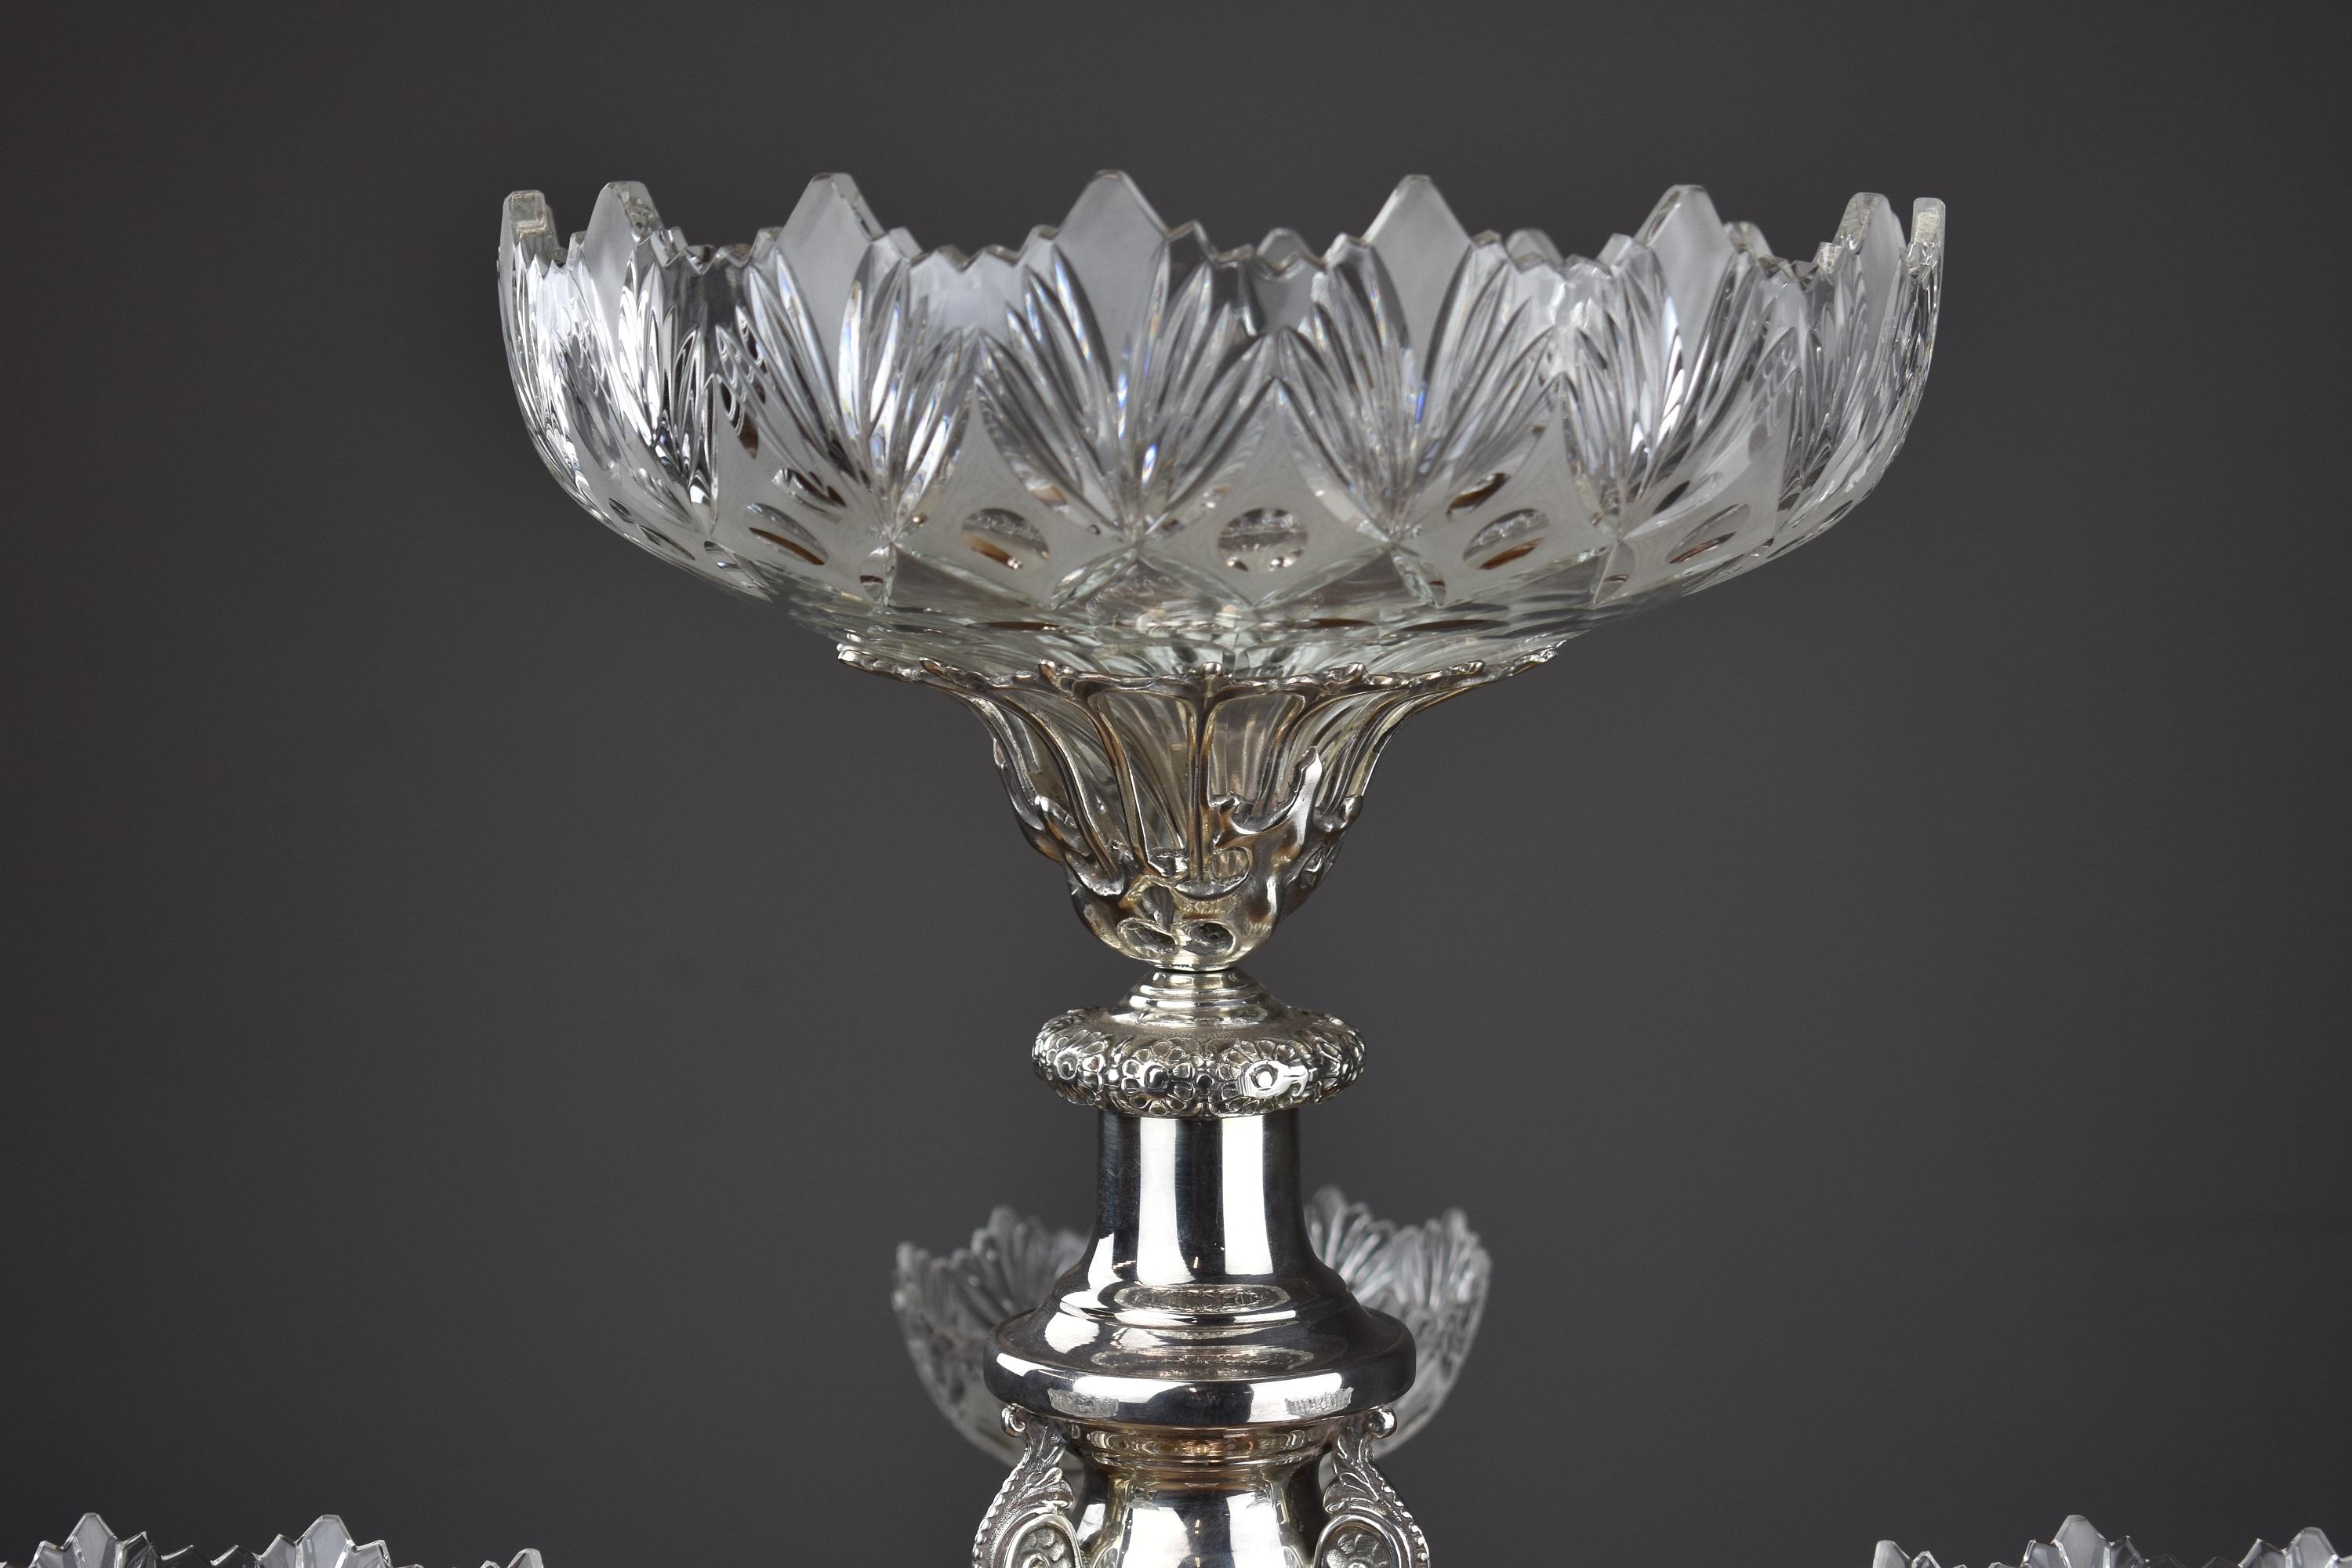 A fine quality late 19th-early 20th century silver plate centrepiece with central column and three foliate arms with leaf mounted holders supporting three etched cut glass bowls and a large top glass bowl on a foliate bordered triangular base with